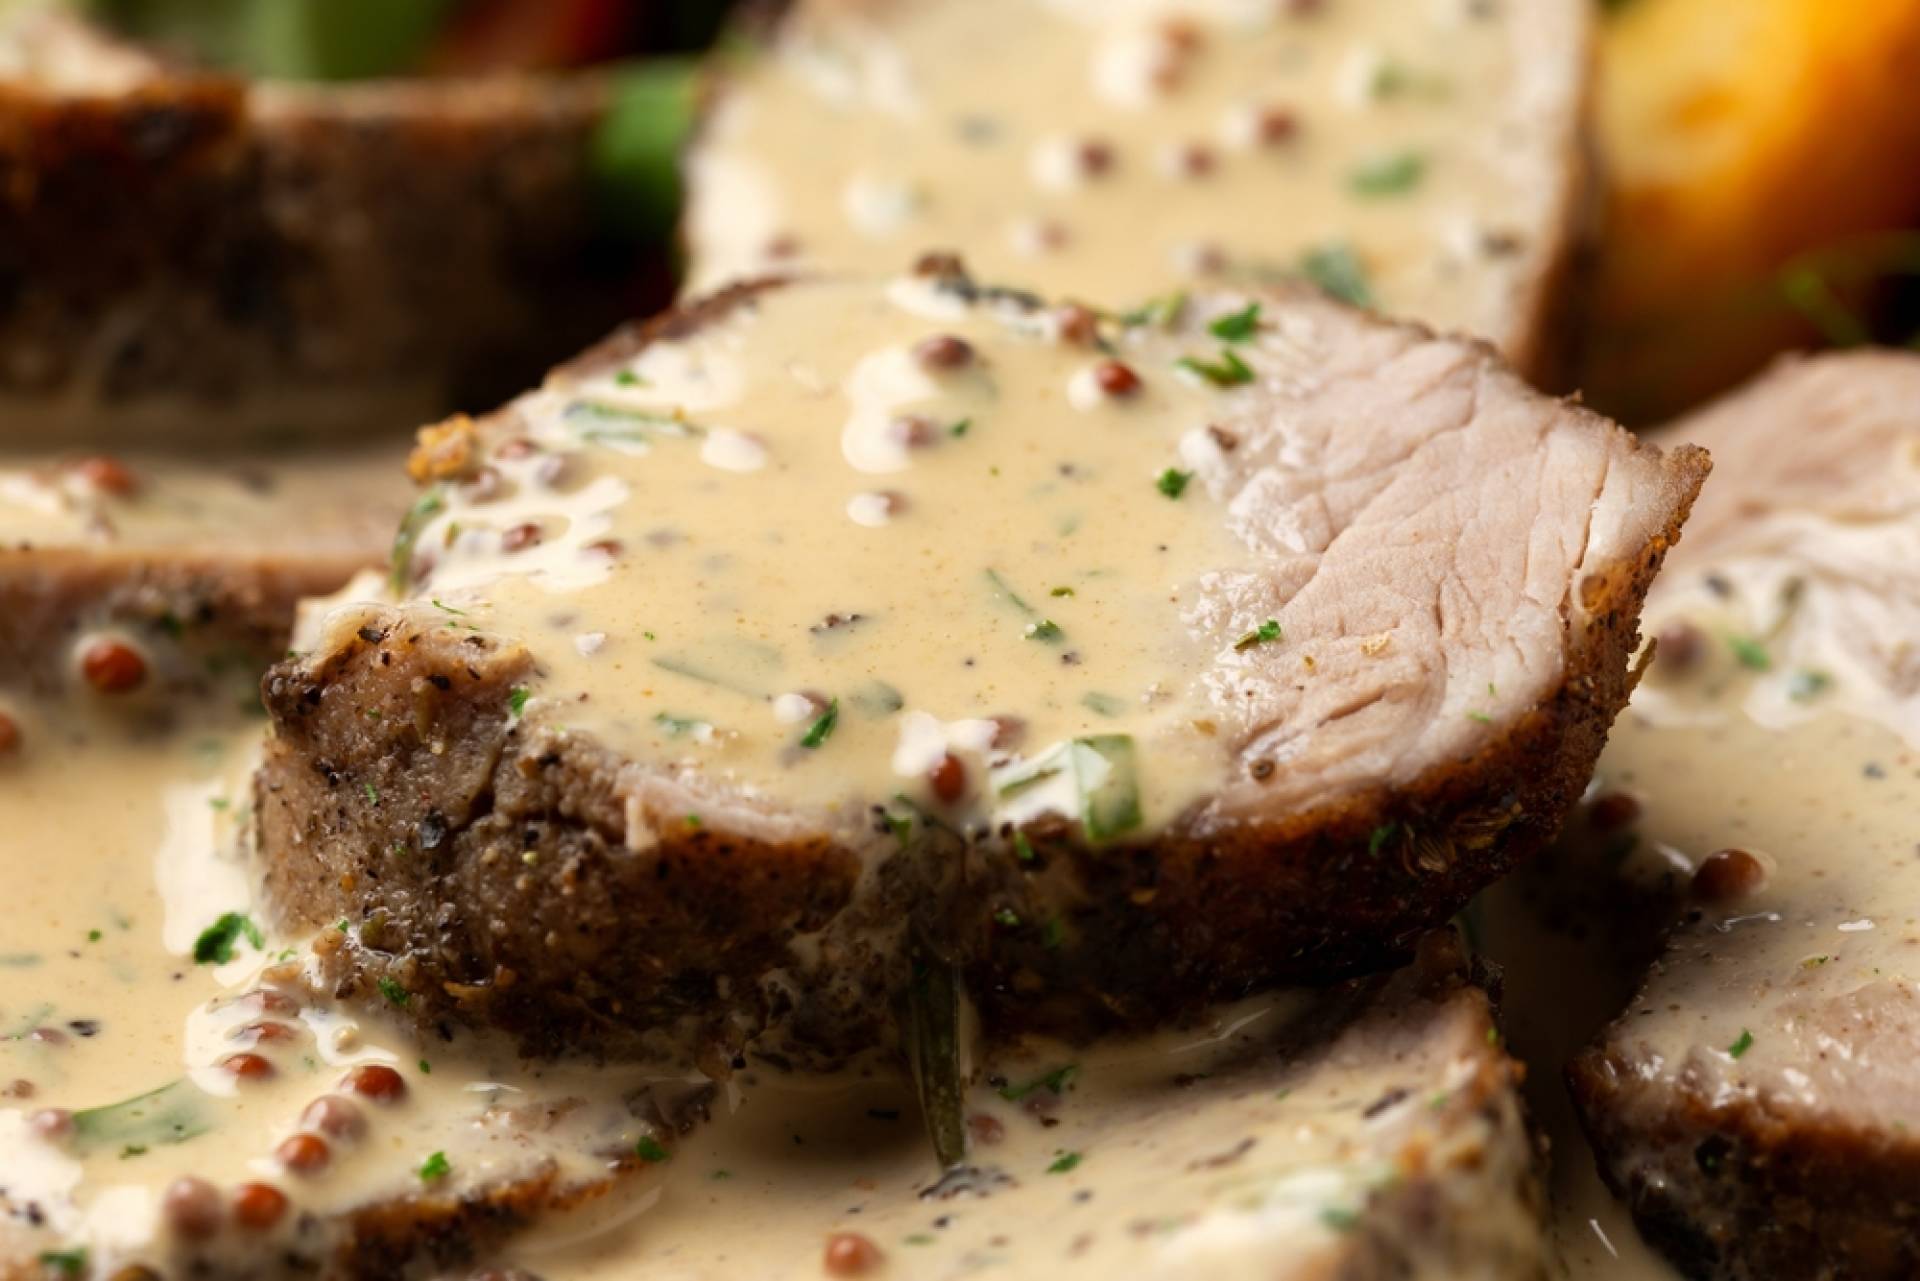 Pork Medallions with Mashed Potatoes and Rosemary Gravy